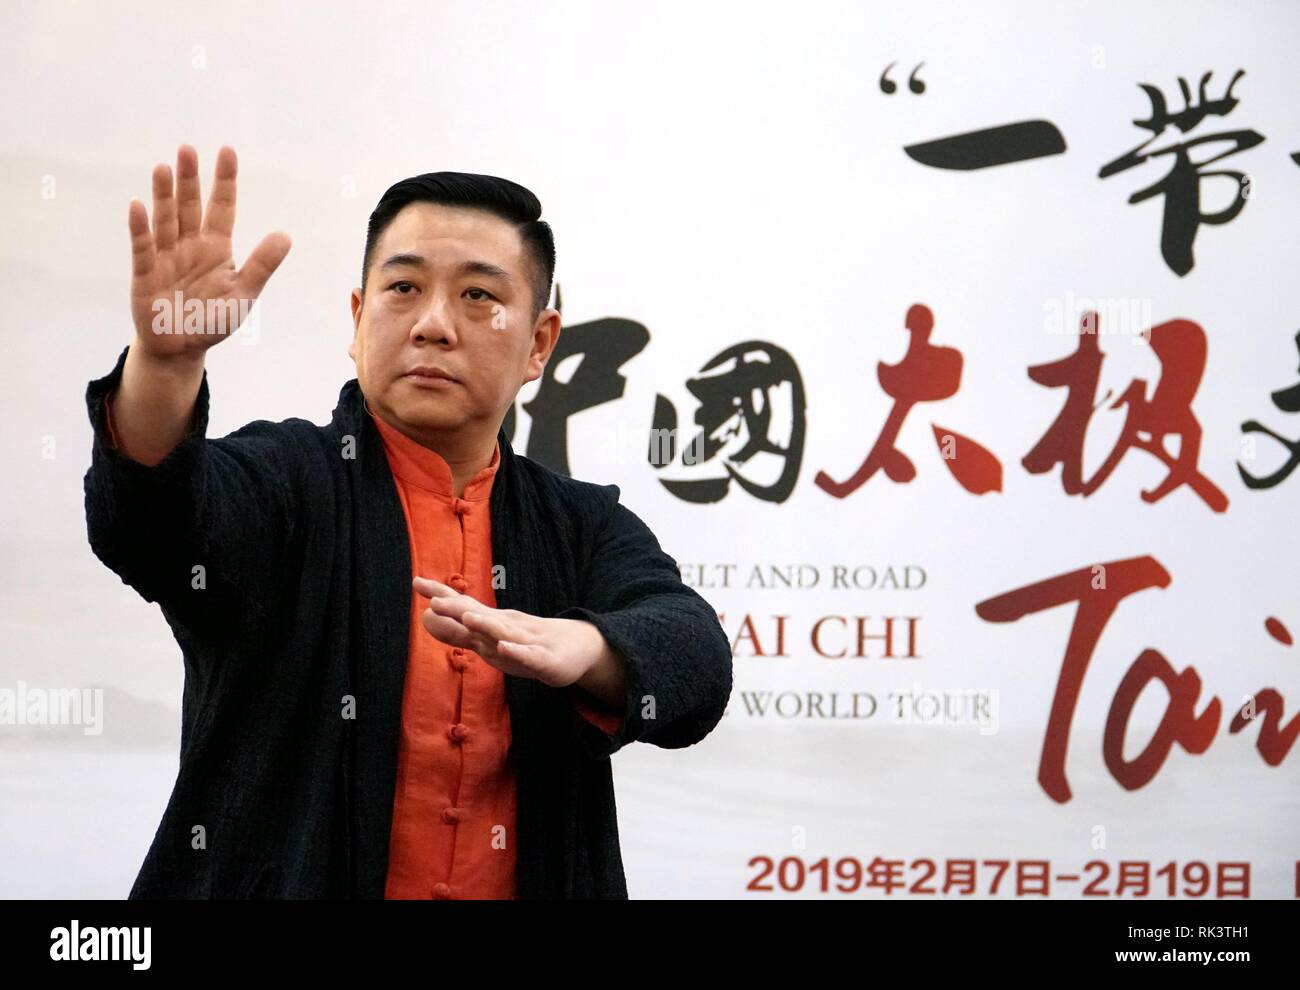 San Francisco, USA. 8th Feb, 2019. Chinese Tai Chi master Fu Qingquan demonstrates Tai Chi in Fremont, California, the United States, Feb. 8, 2019. A team of Chinese Tai Chi masters Friday started their tour to the United States to promote Chinese Tai Chi culture to overseas Chinese and American Kung Fu fans. San Francisco is the first stop of the team's 12-day Tai Chi Culture World Tour. The trip will also take them to two other U.S. cities of Las Vegas and Los Angeles. Credit: Wu Xiaoling/Xinhua/Alamy Live News Stock Photo